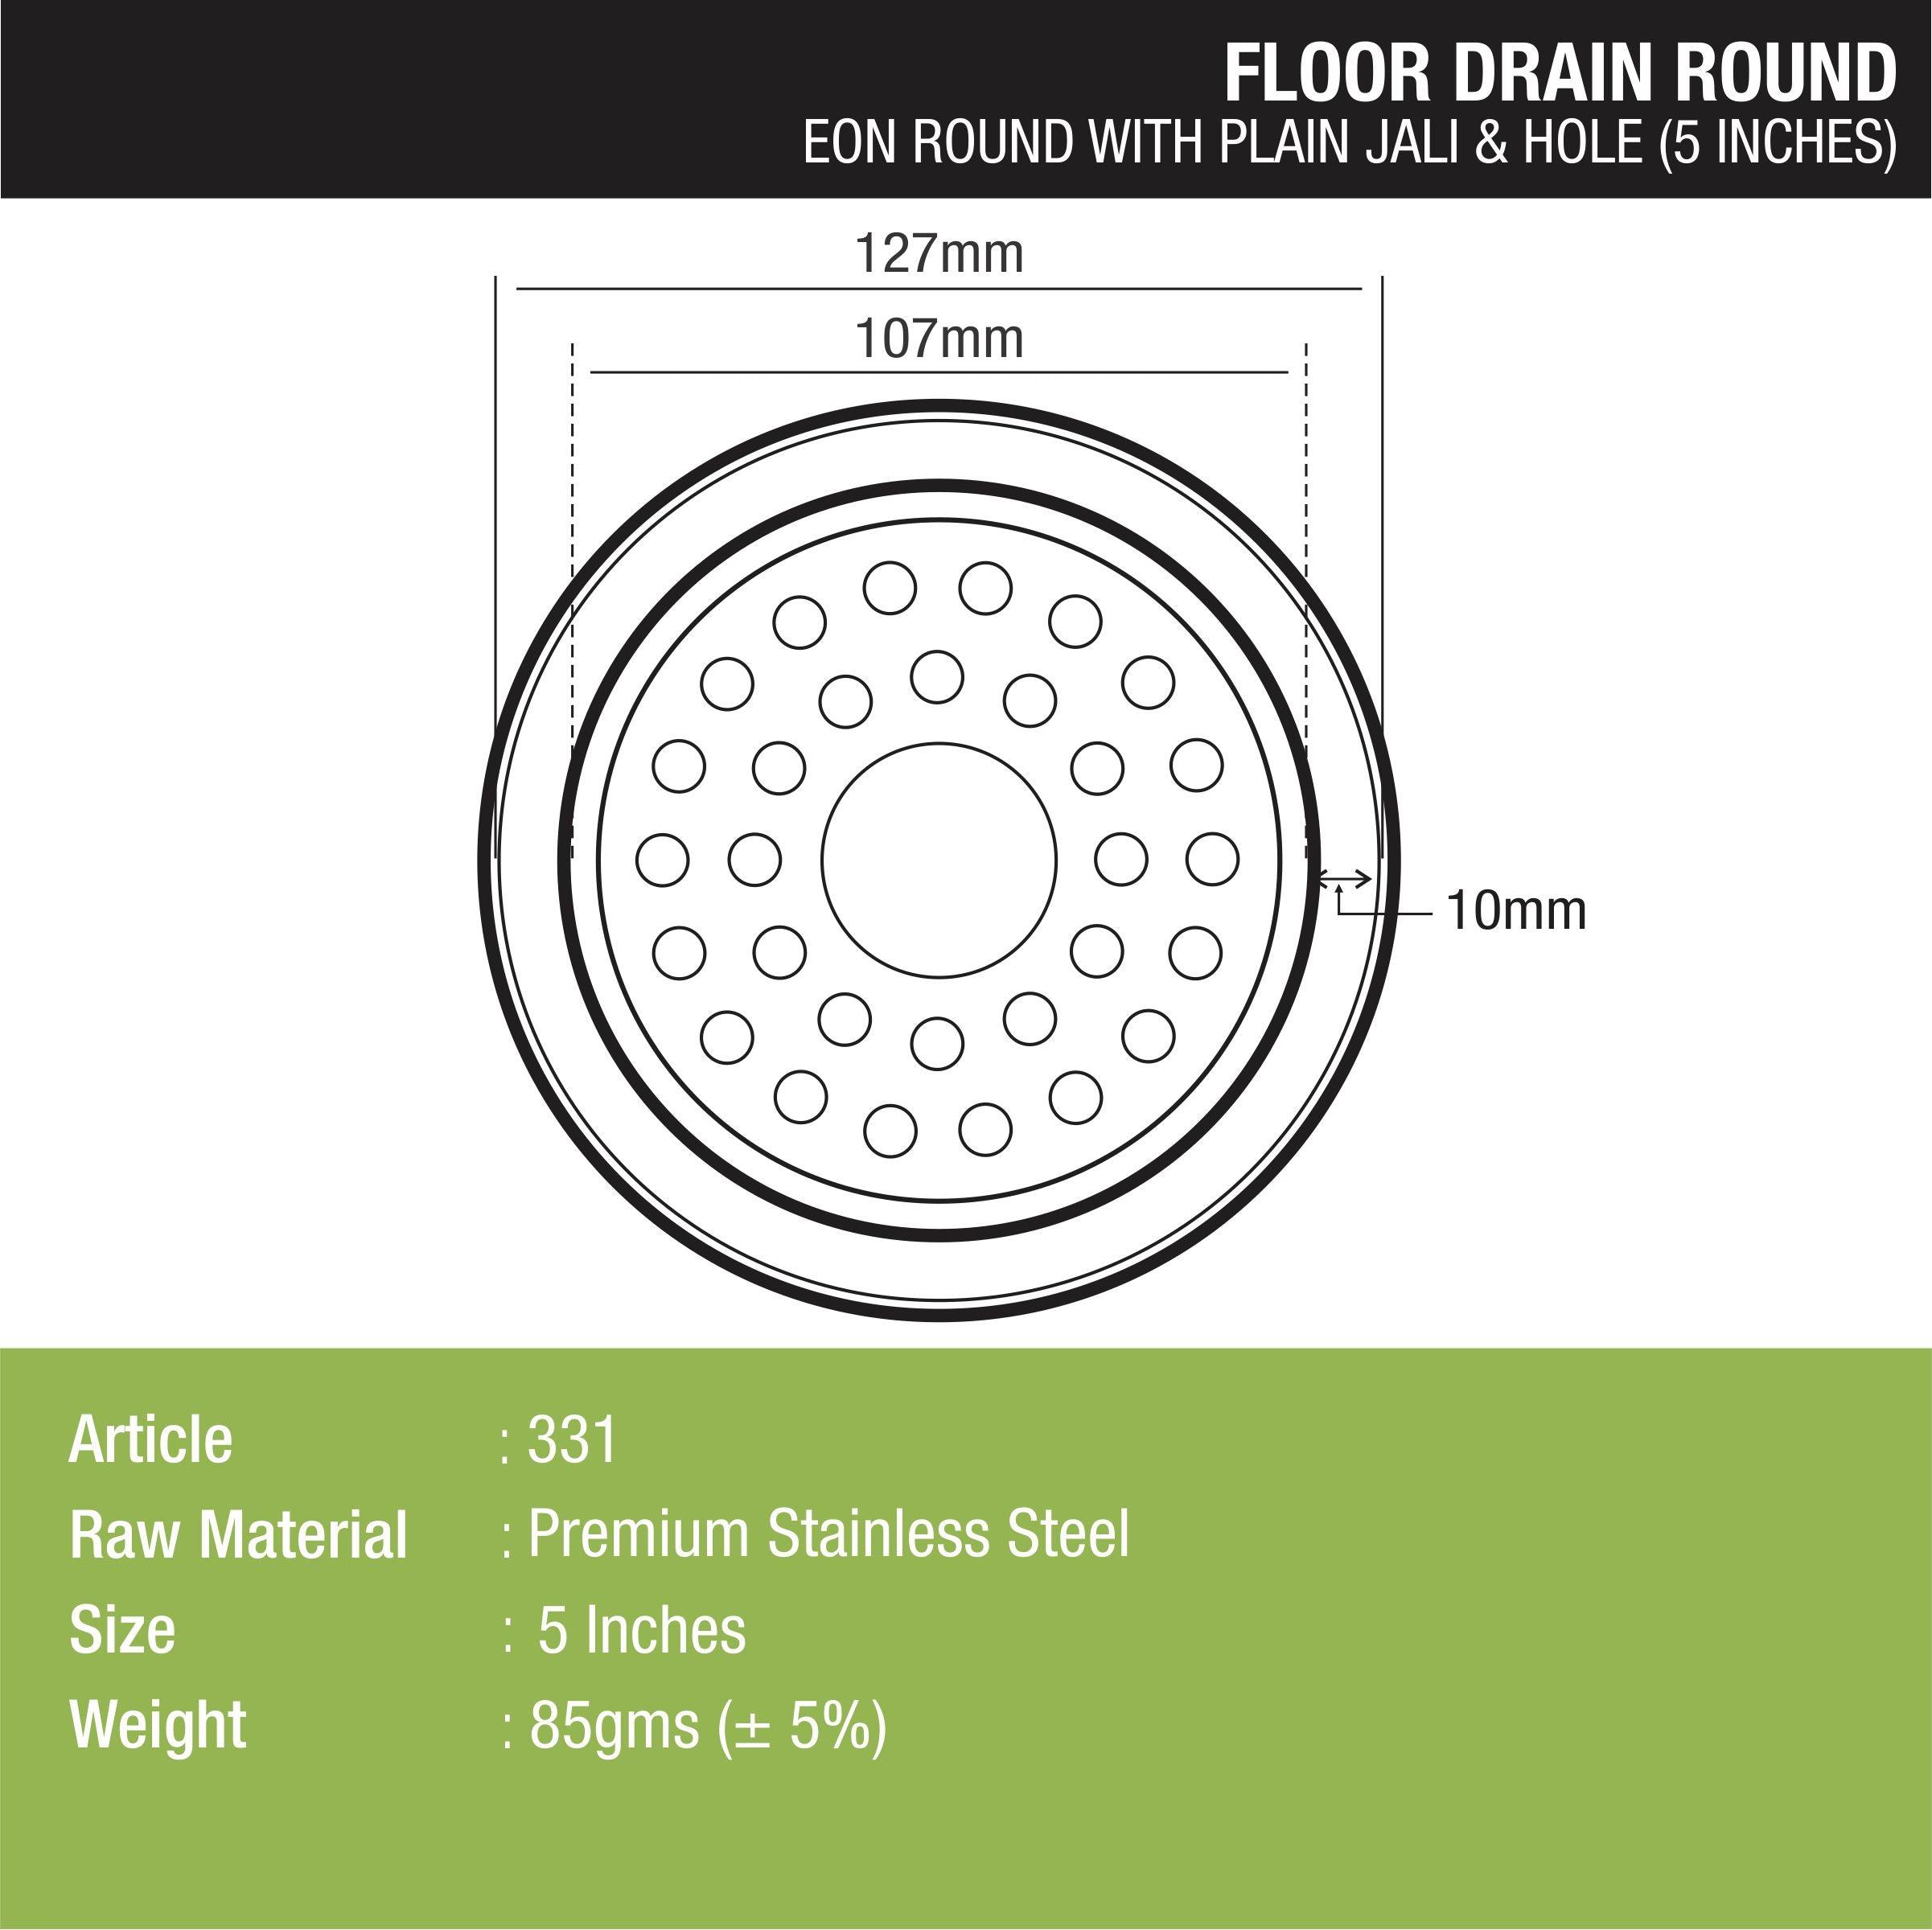 Eon Round Floor Drain with Plain Jali & Hole (5 inches) dimensions and sizes